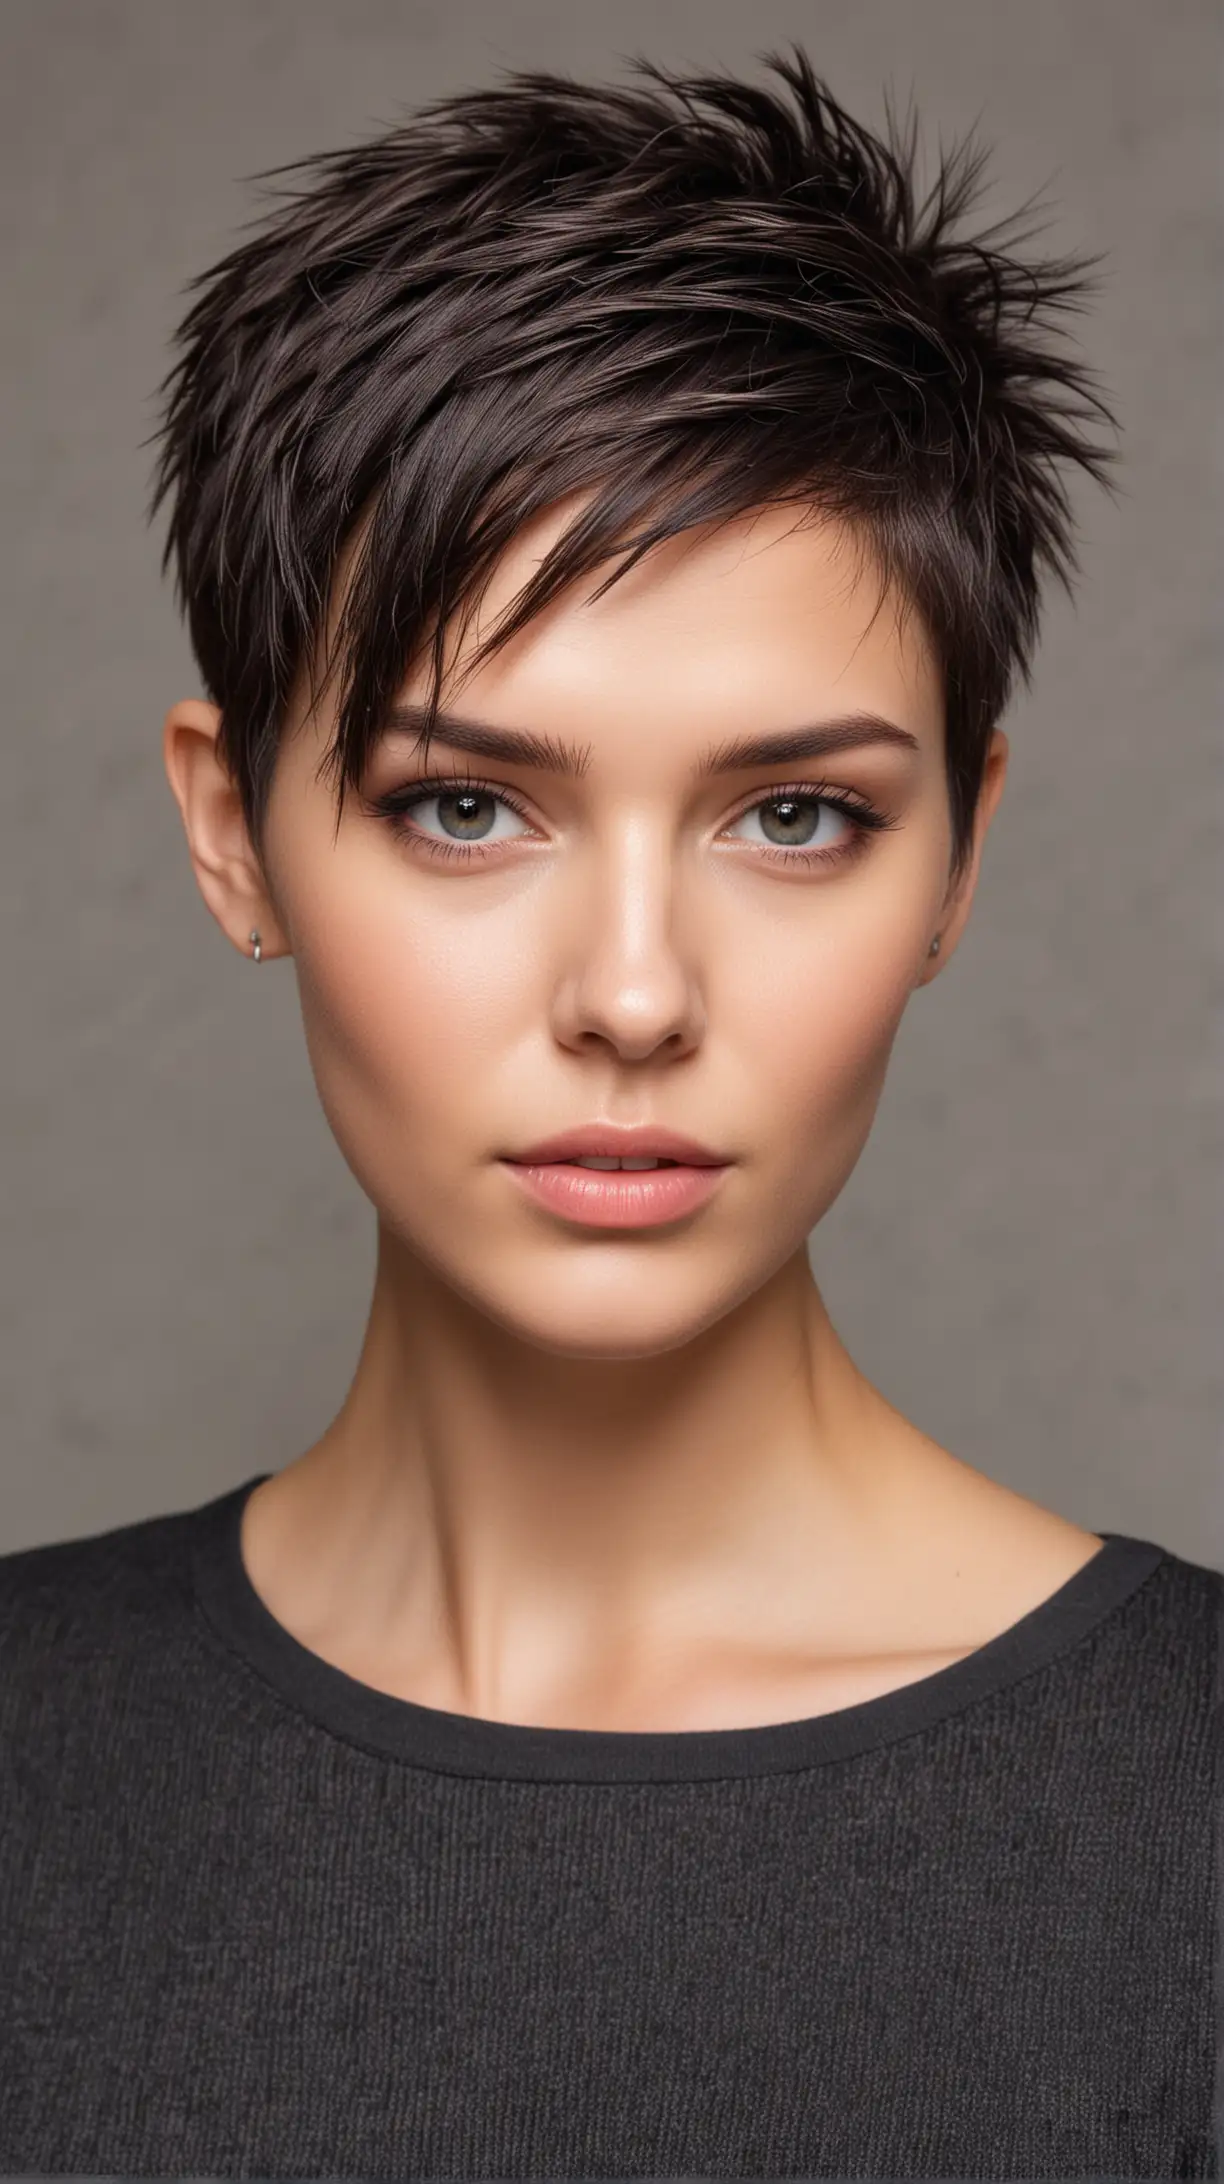 beautiful girl model, short haircut - Edgy Top Crop for Fine Hair, age - 30 years